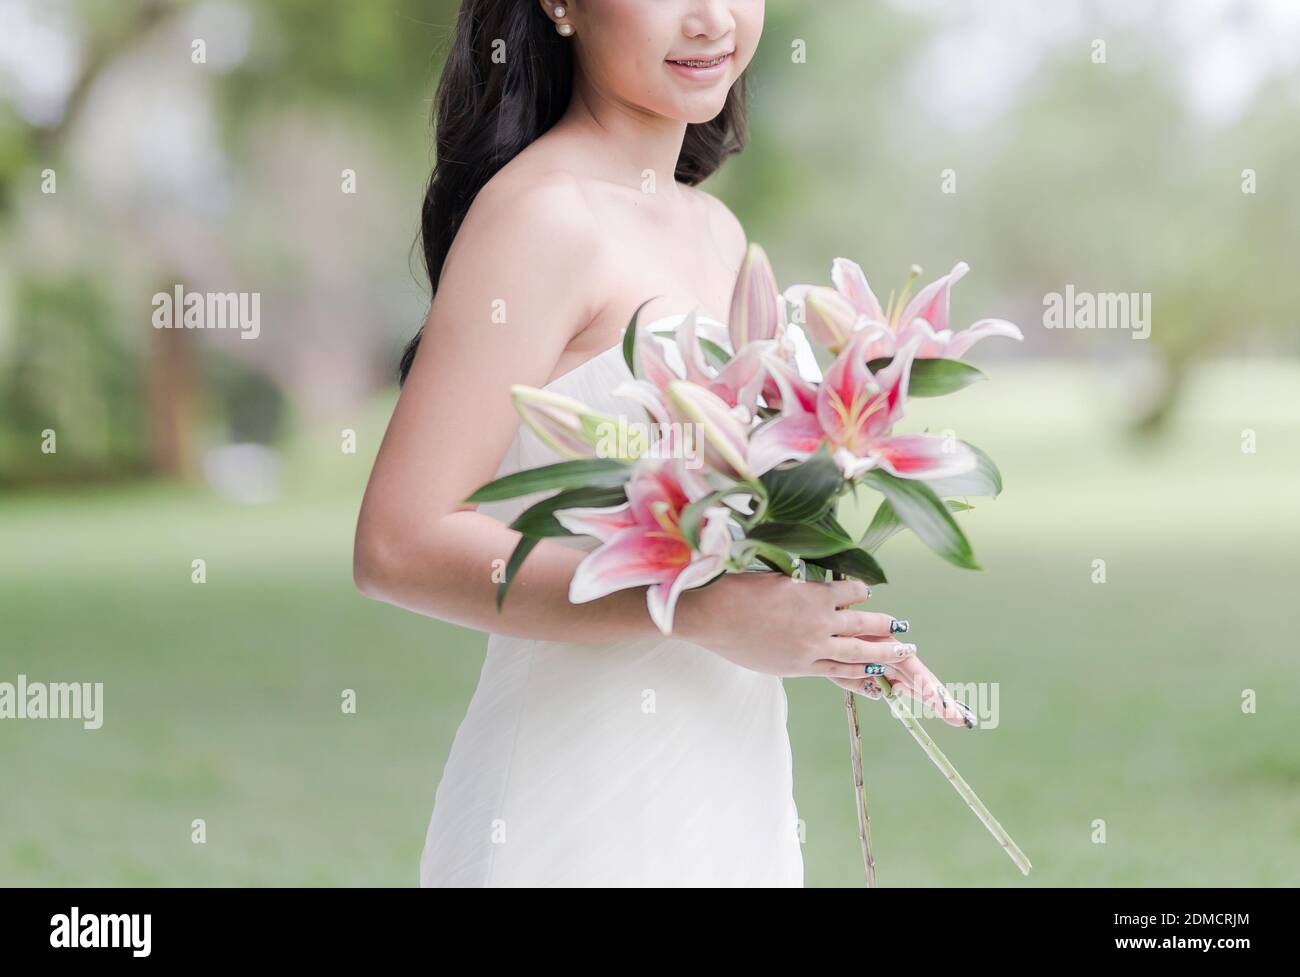 Midsection Of Smiling Bride Holding Flowers While Standing Outdoors Stock Photo